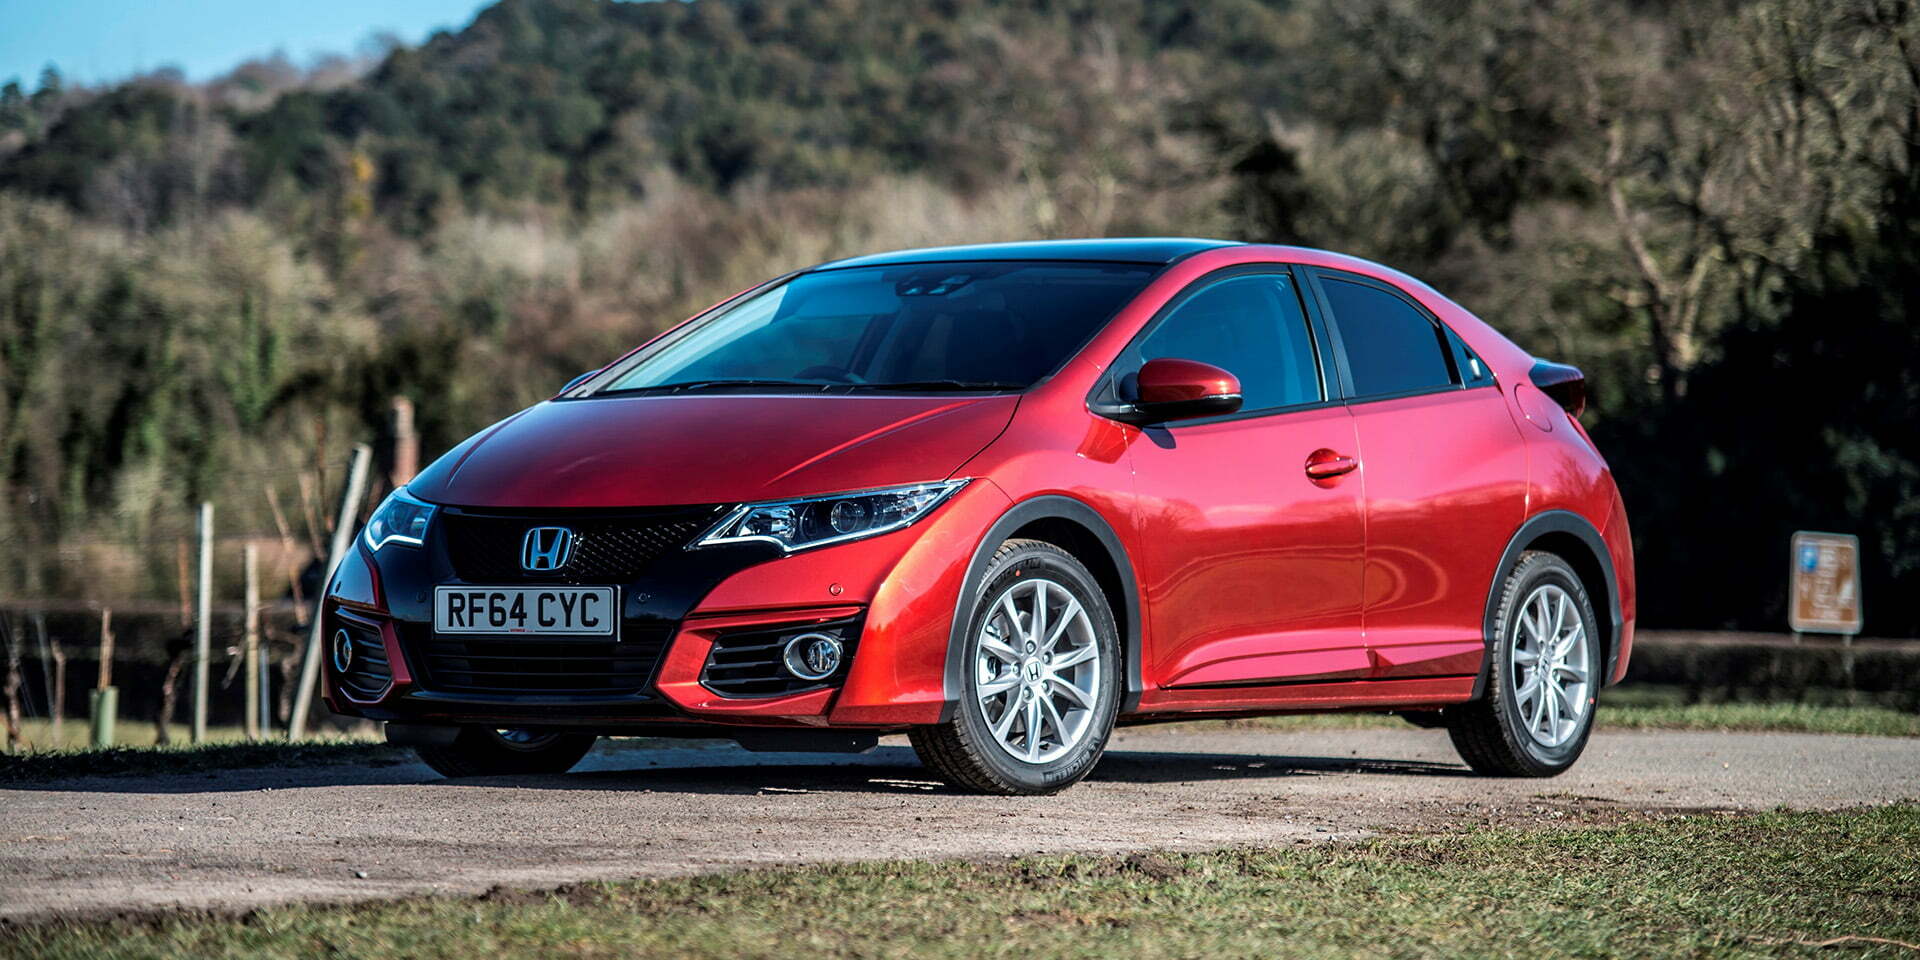 Warrantywise has ranked Honda as the UK's most reliable car brand for 2022